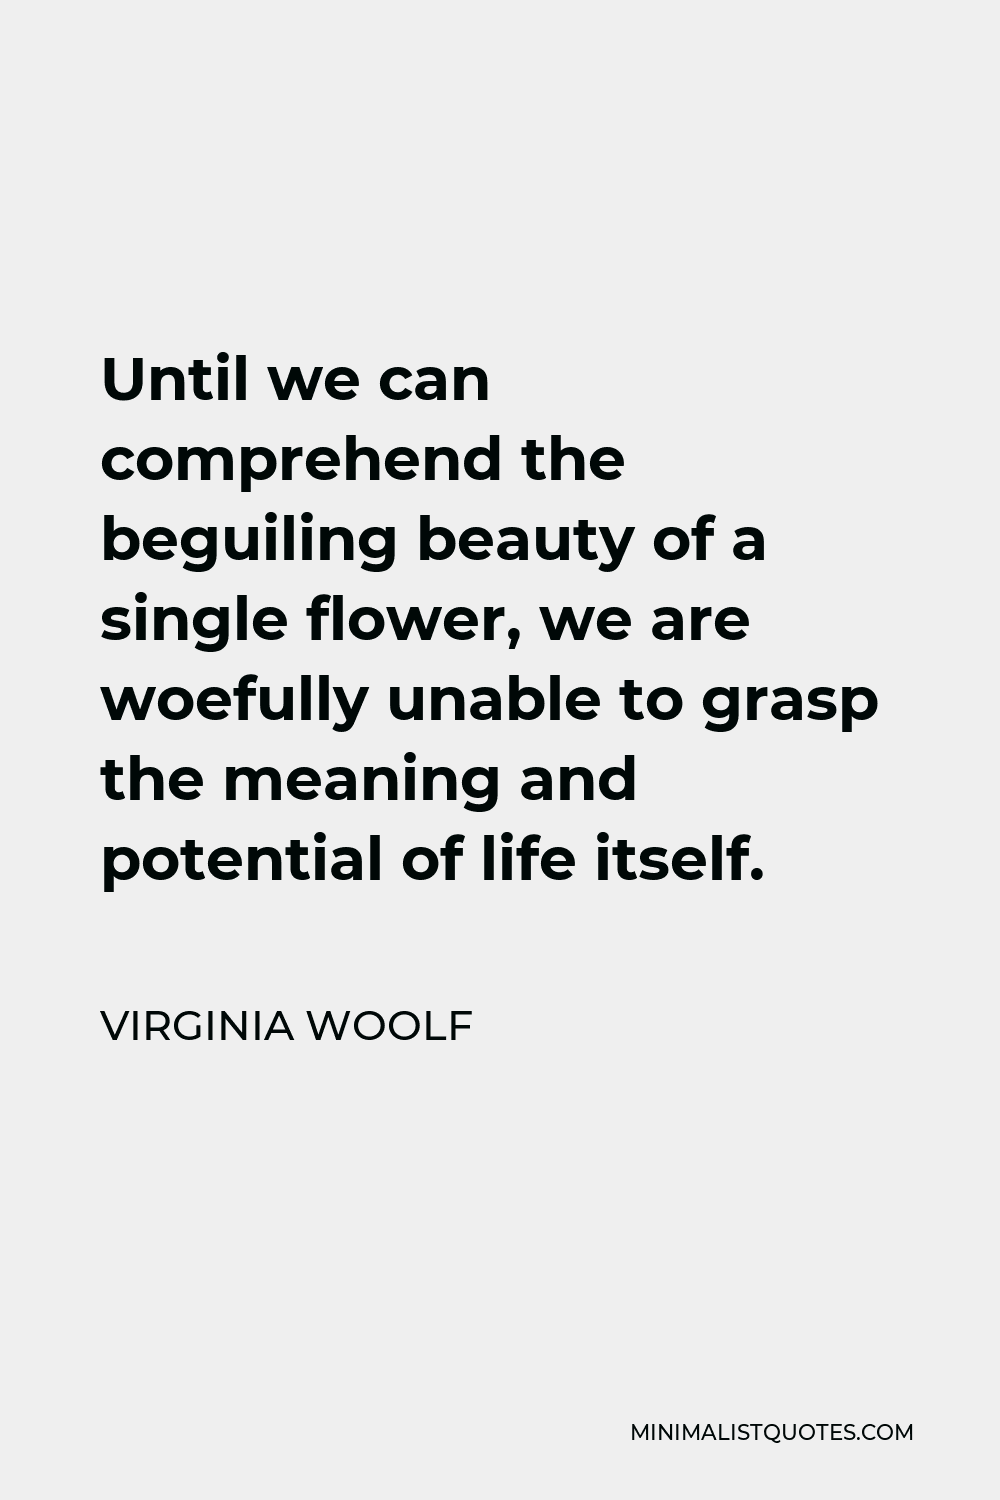 Virginia Woolf Quote - Until we can comprehend the beguiling beauty of a single flower, we are woefully unable to grasp the meaning and potential of life itself.